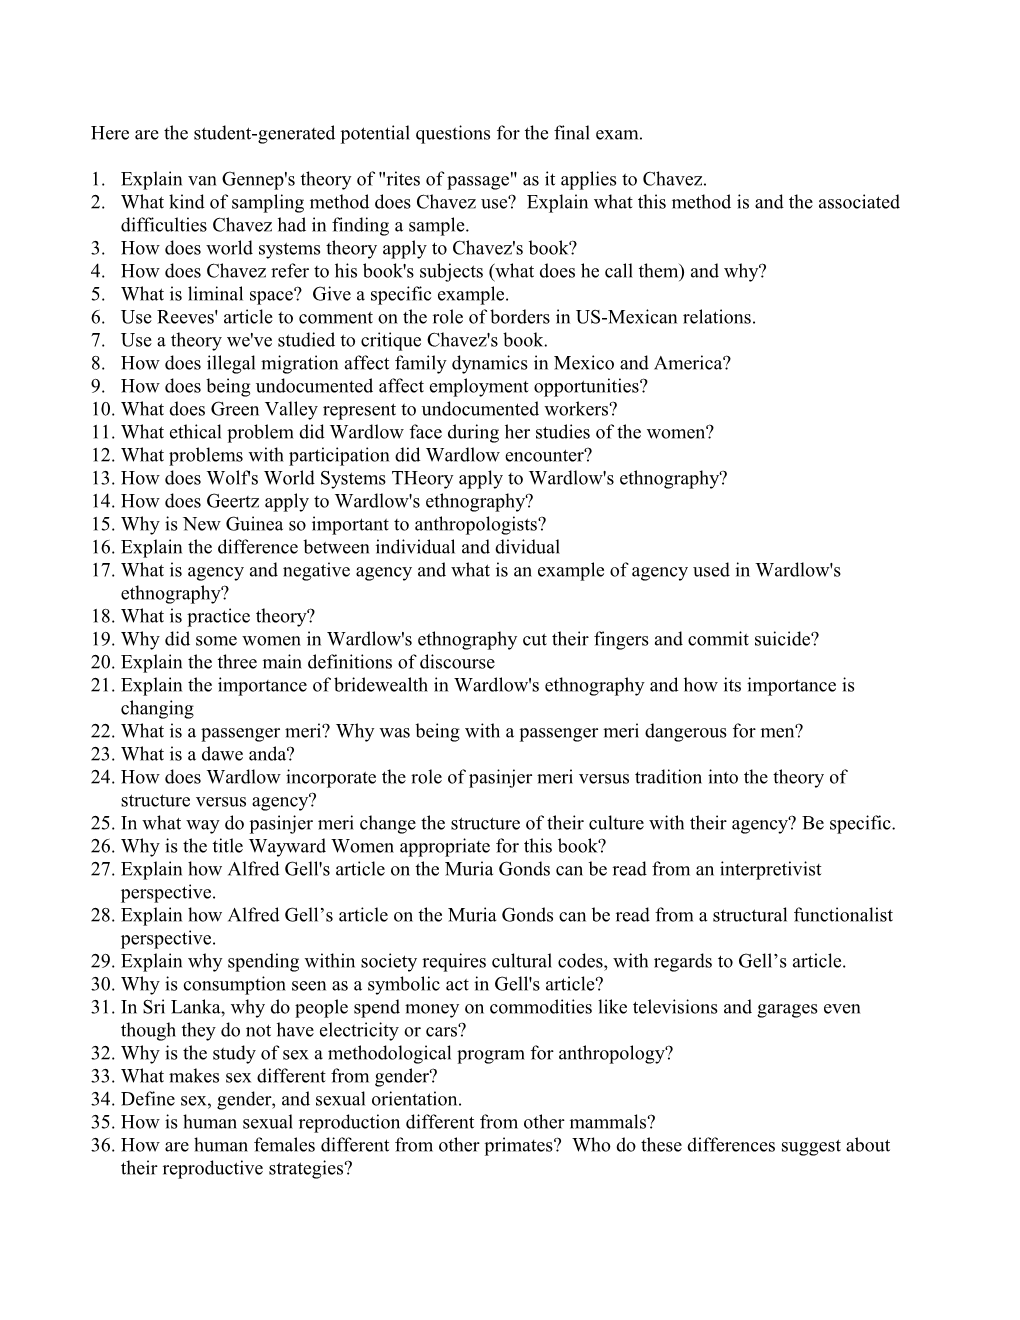 Here Are the Student-Generated Potential Questions for the Final Exam